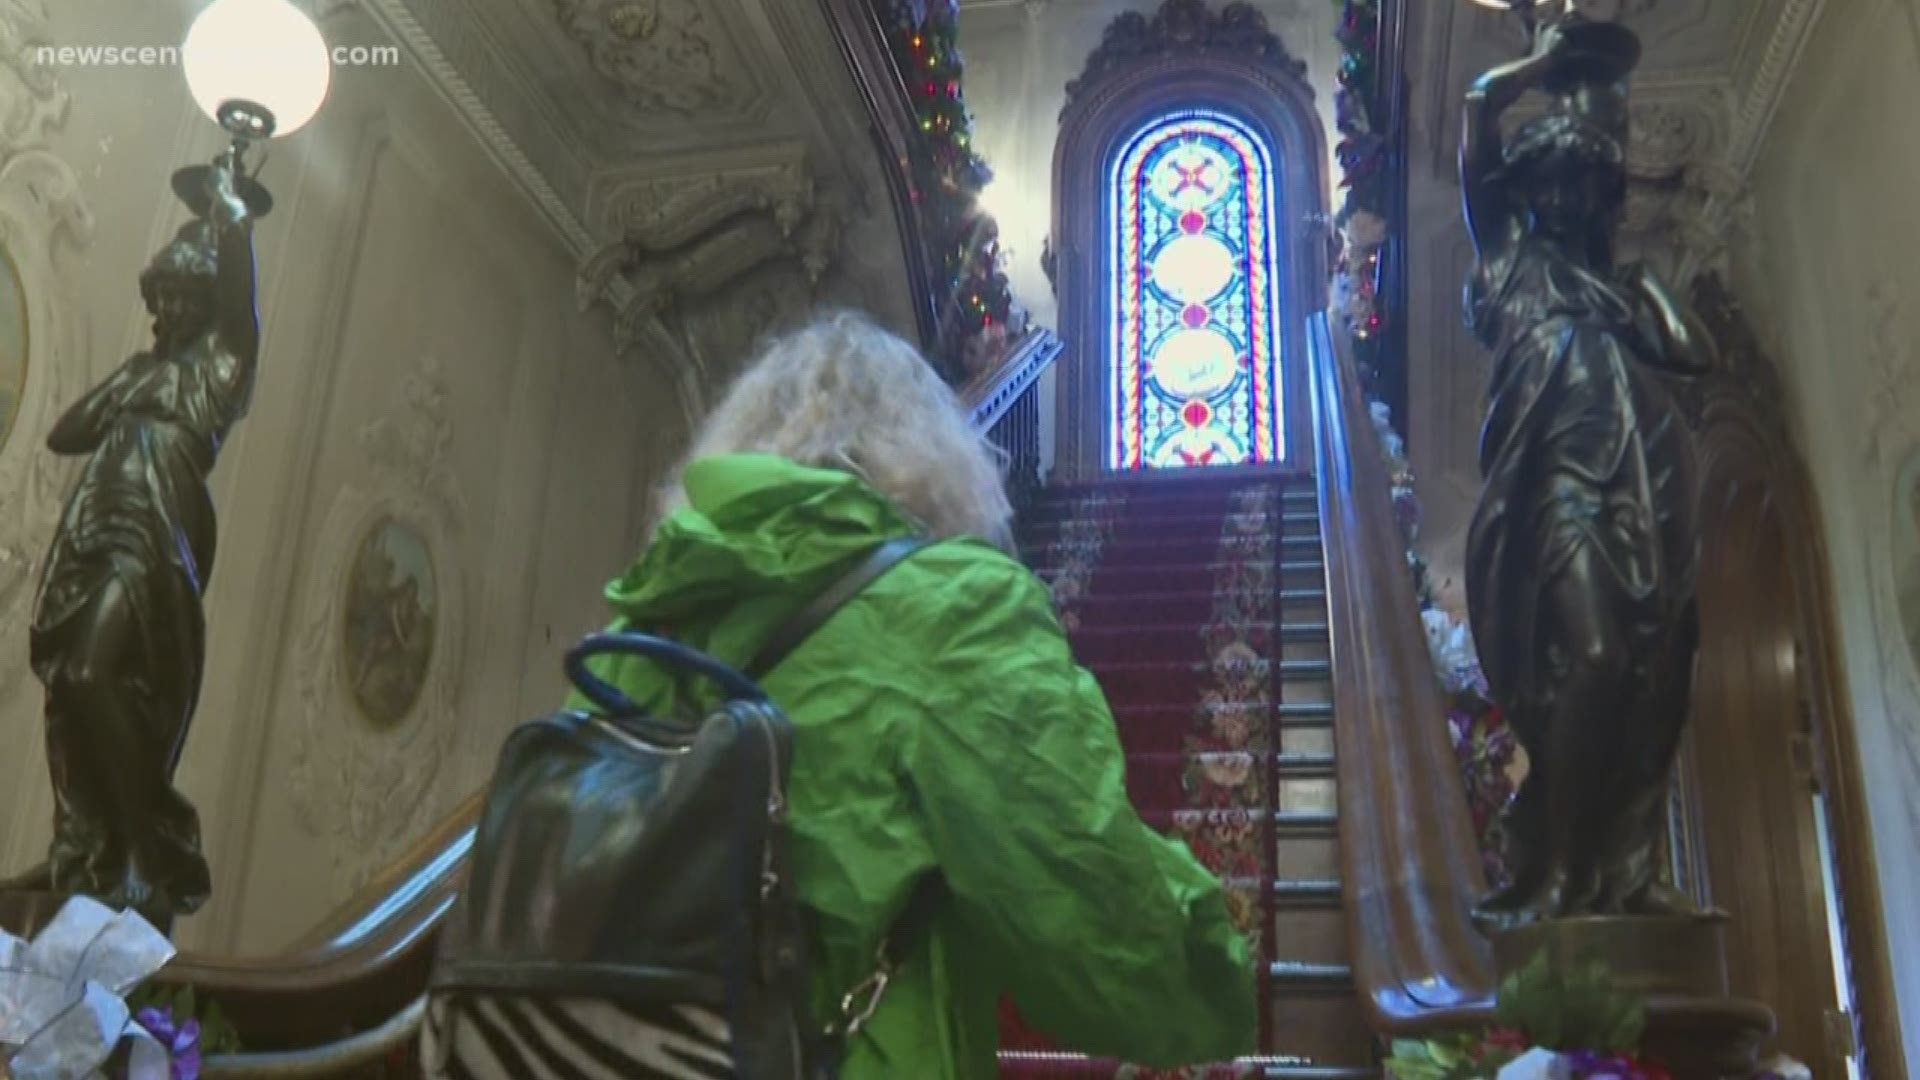 The sights and sounds inside the Victoria Mansion during Christmas time.